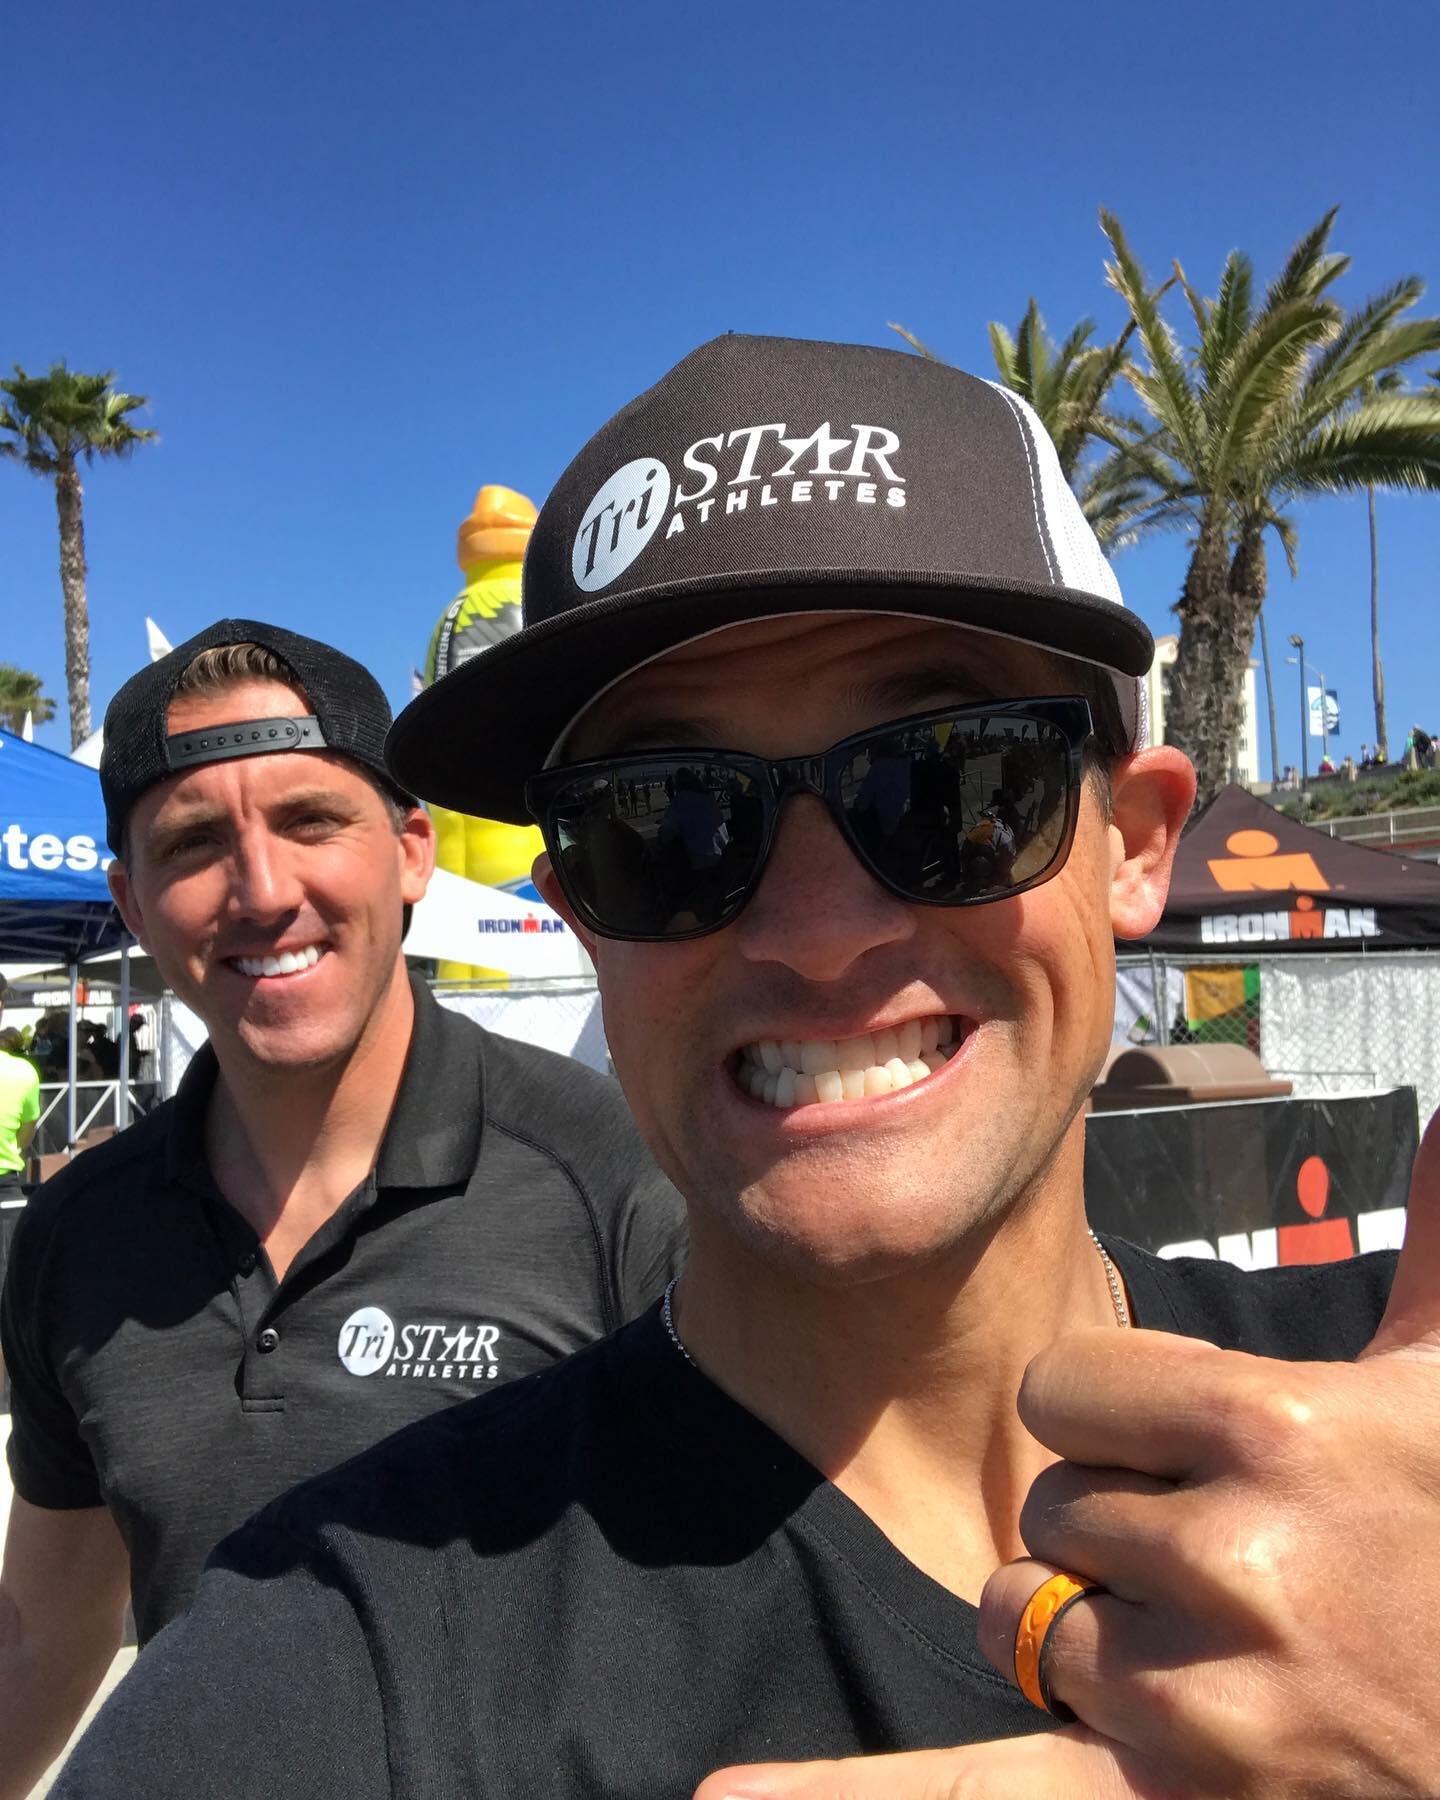 It&rsquo;s that time of year again, just like opening day in baseball&hellip; It&rsquo;s Oceanside! The start of the triathlon season and Southern California&lsquo;s premier race :-) we can&rsquo;t wait to see all the TriStar Athletes training and ra